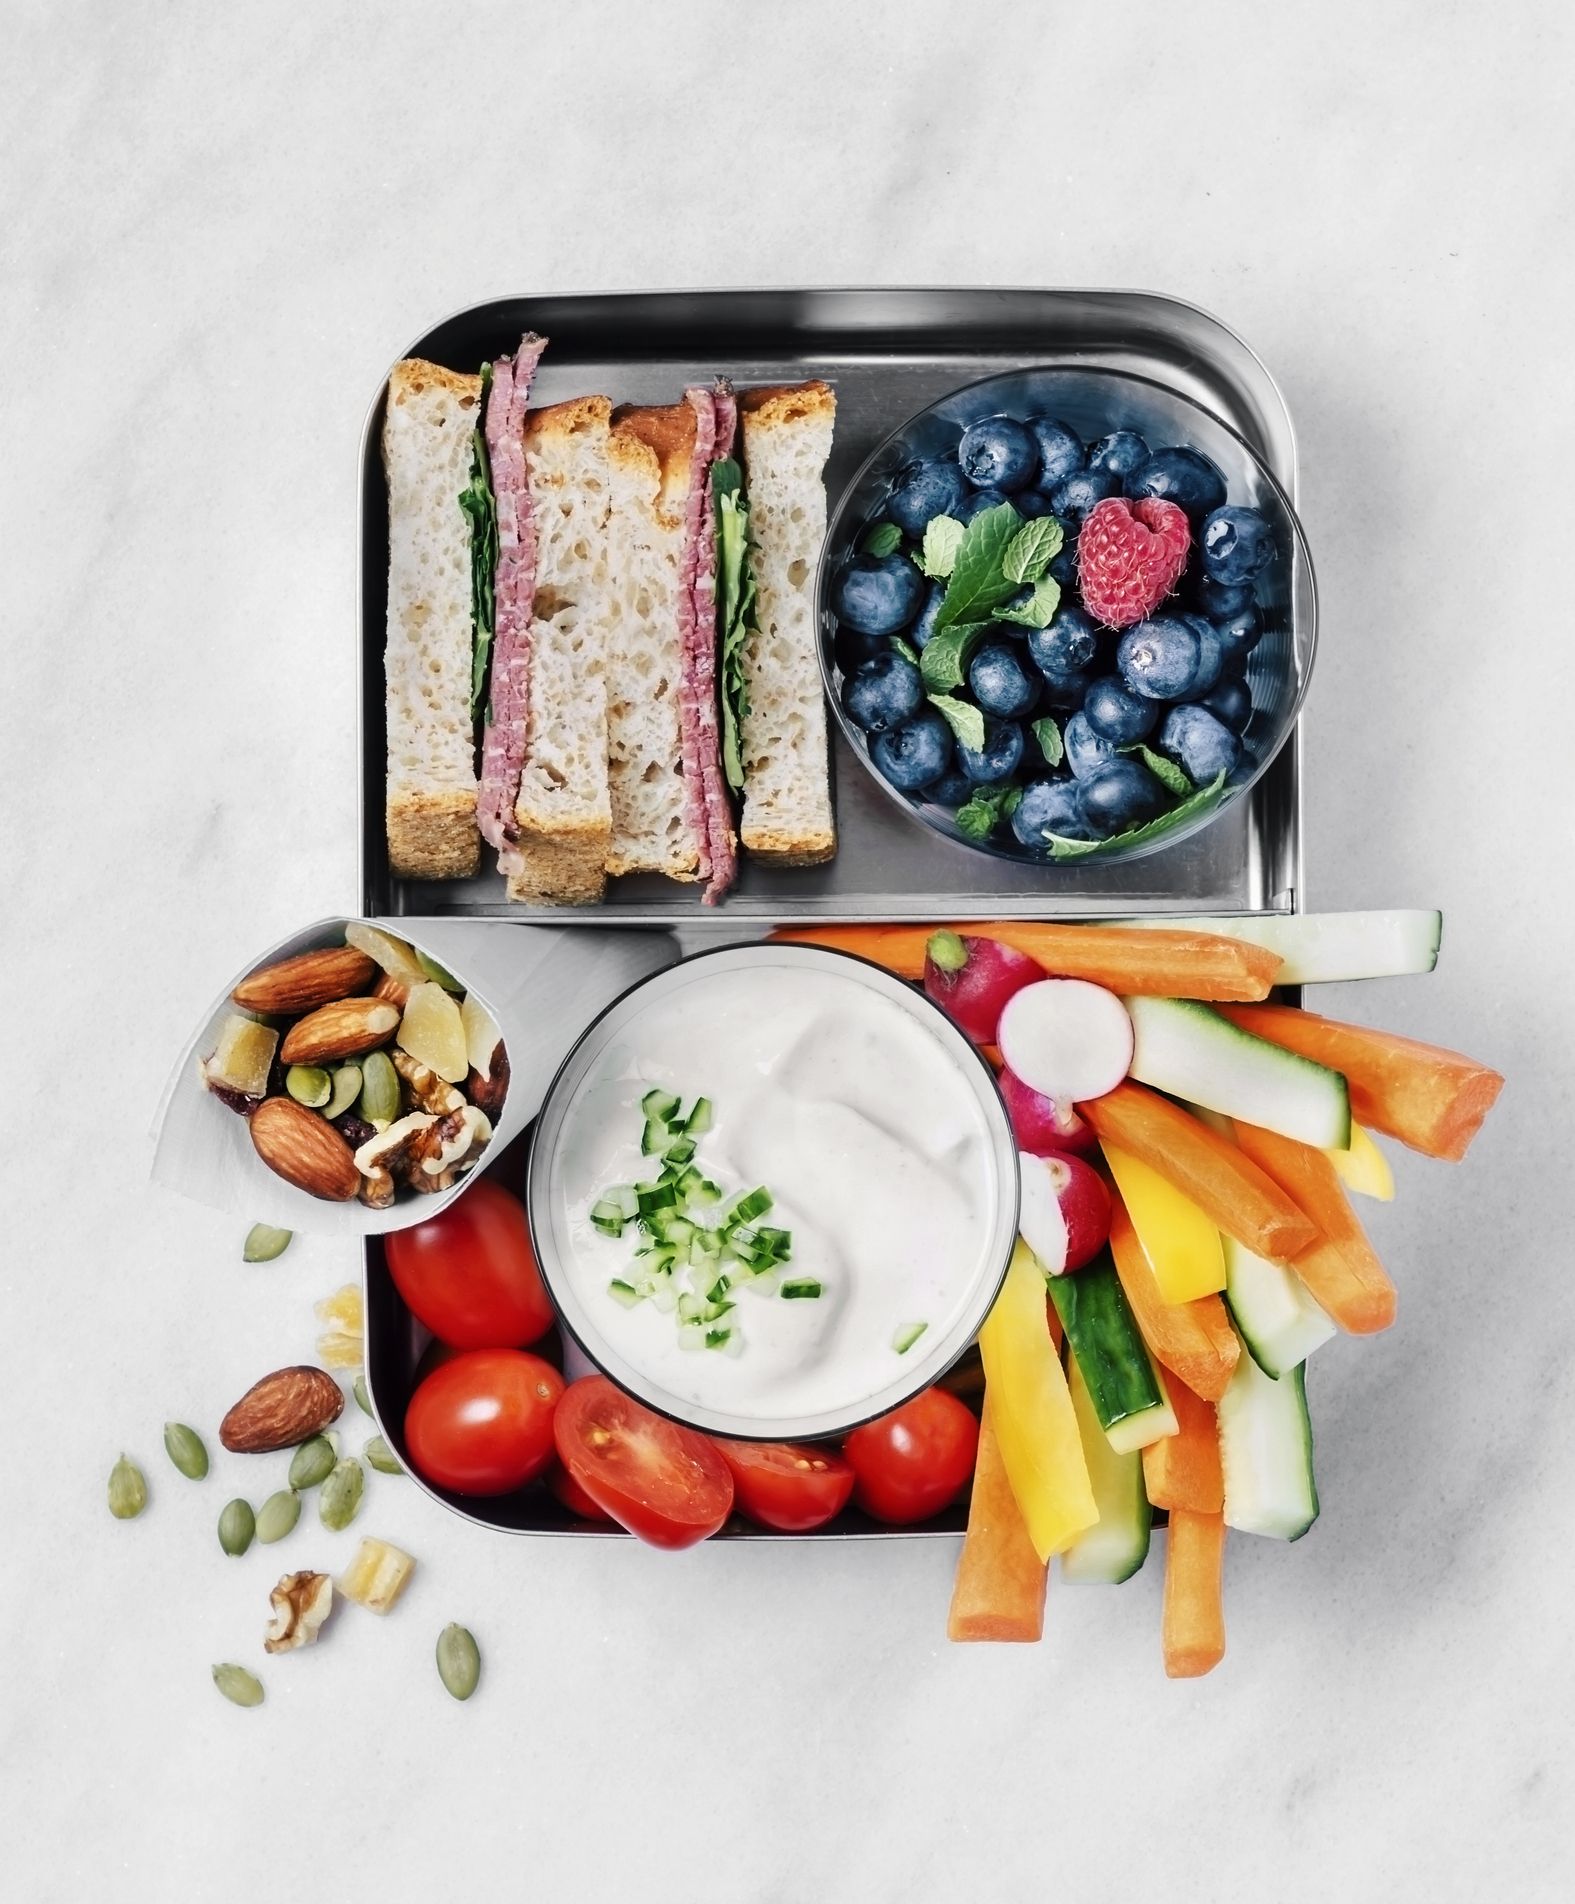 12 work lunch ideas to help you eat better and save money - Reviewed